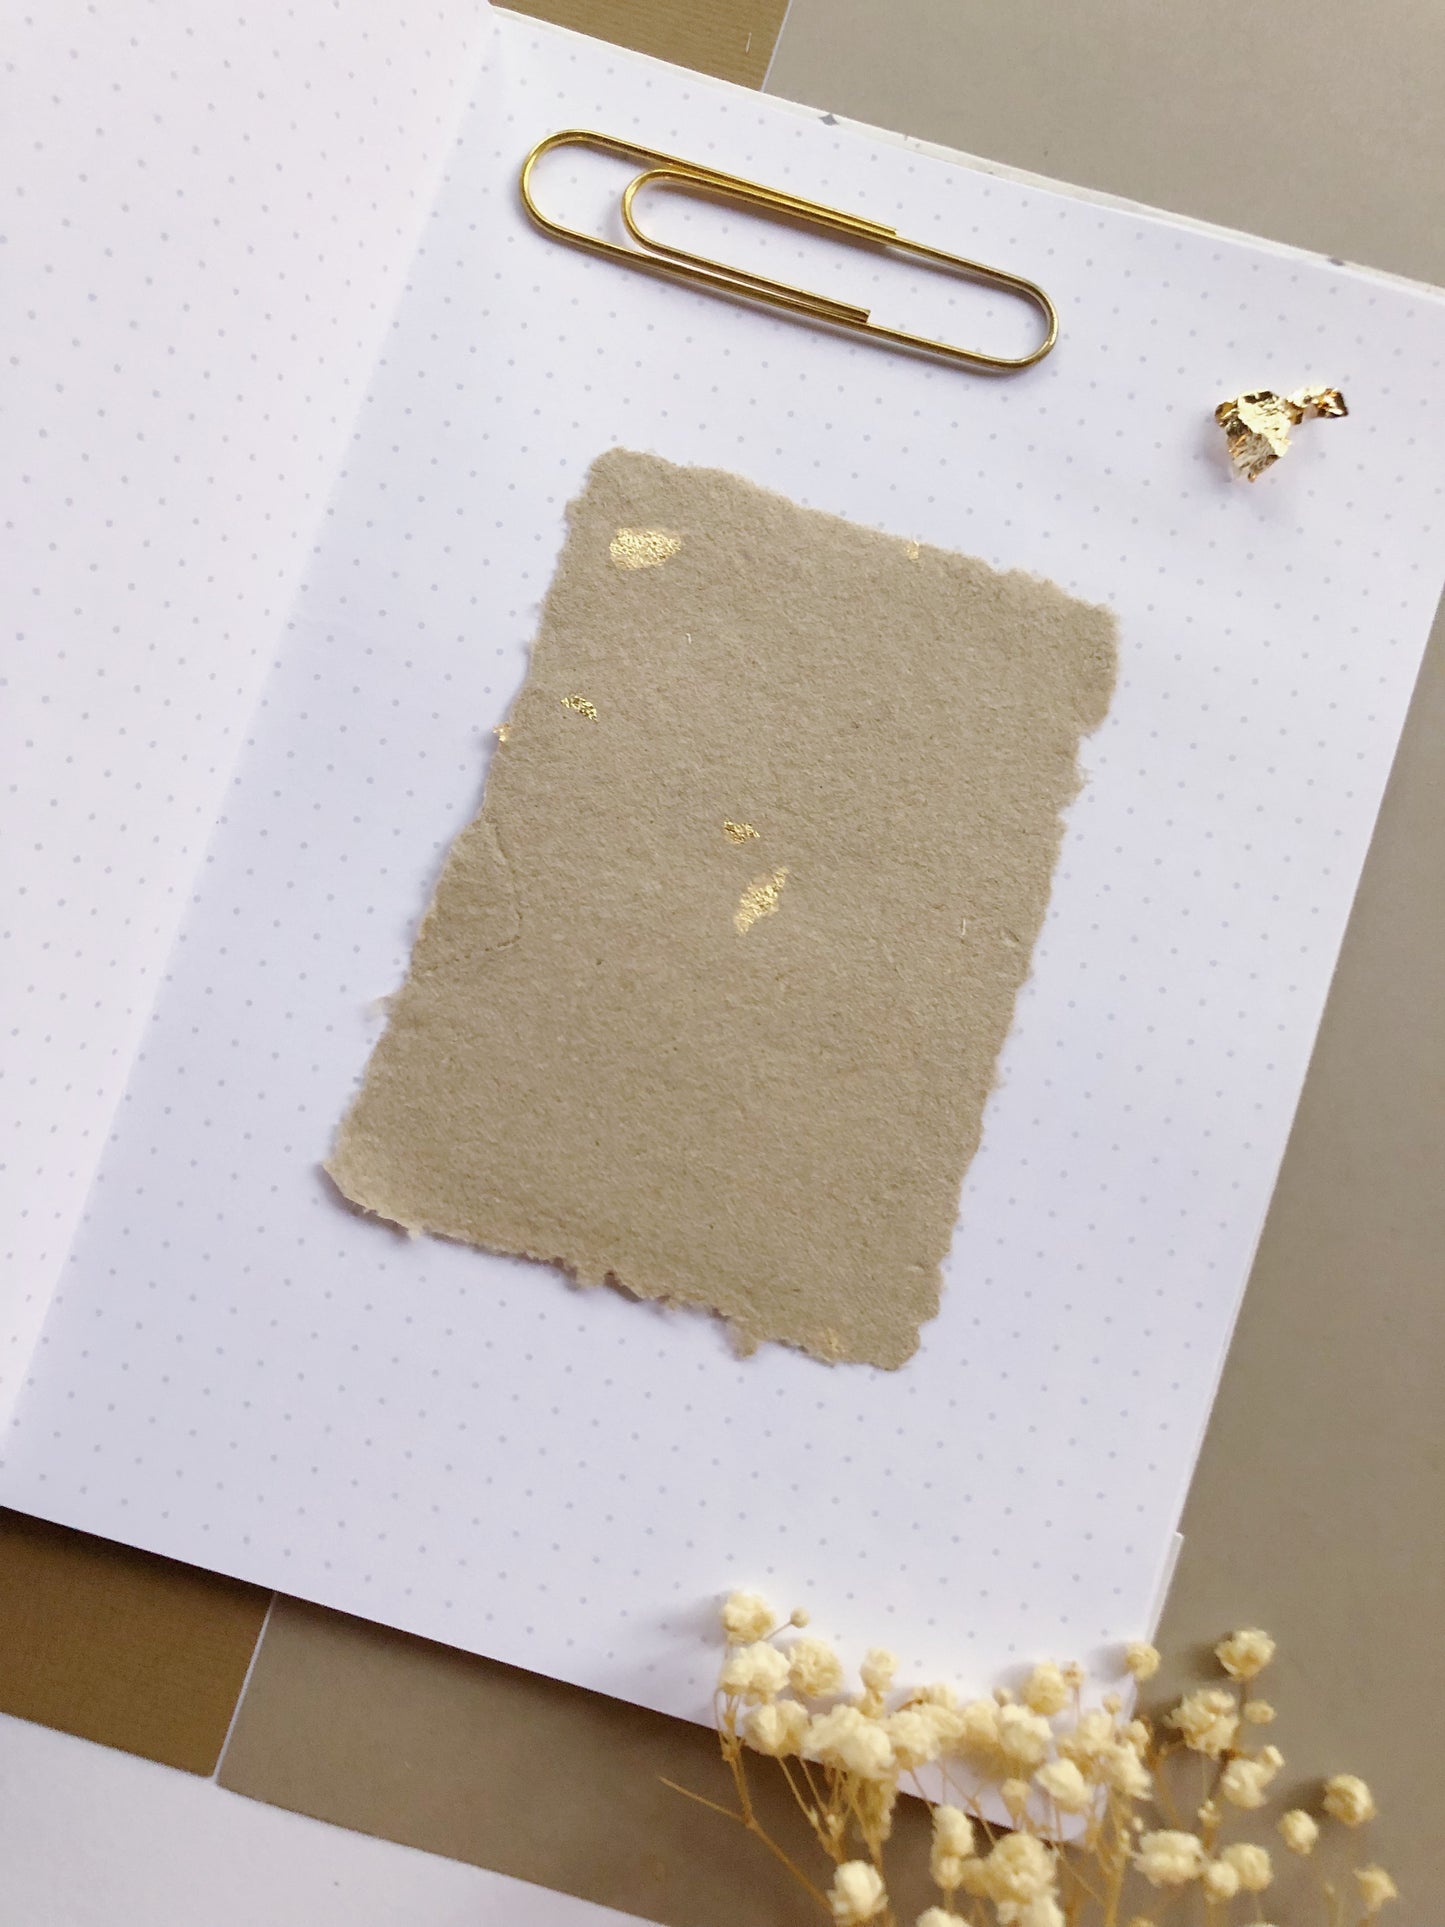 "A6 Hand Made Gold Foil Paper"